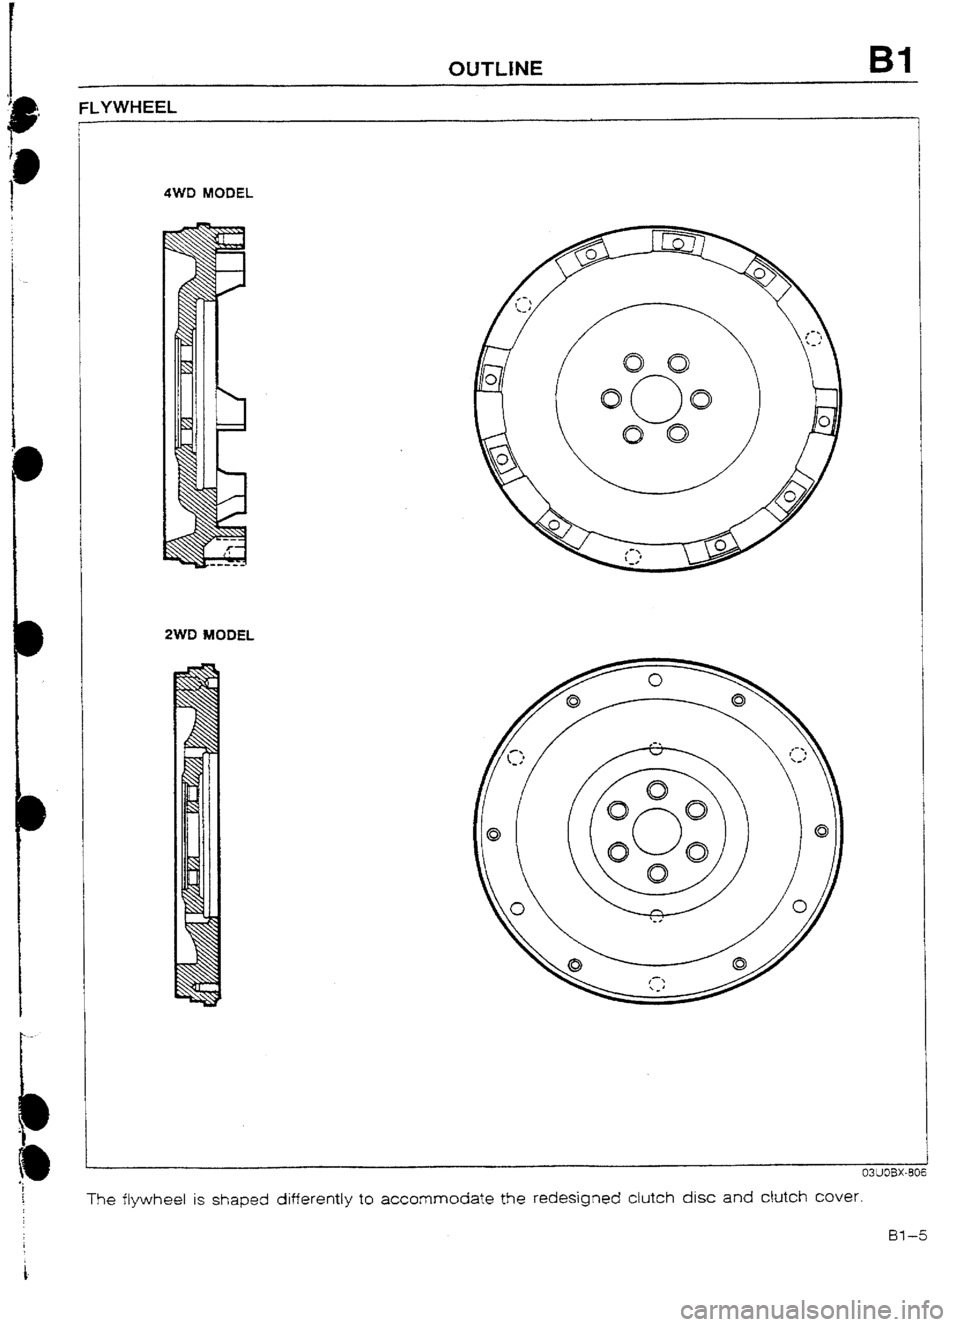 MAZDA 232 1990   Suplement Owners Guide OUTLINE Bl 
FLYWHEEL 
4WD MODEL 
2WD MODEL 
The flywheel is shaped differently to accommodate the redesigned clutch disc 
and cbtch cover. 
Bl-5  